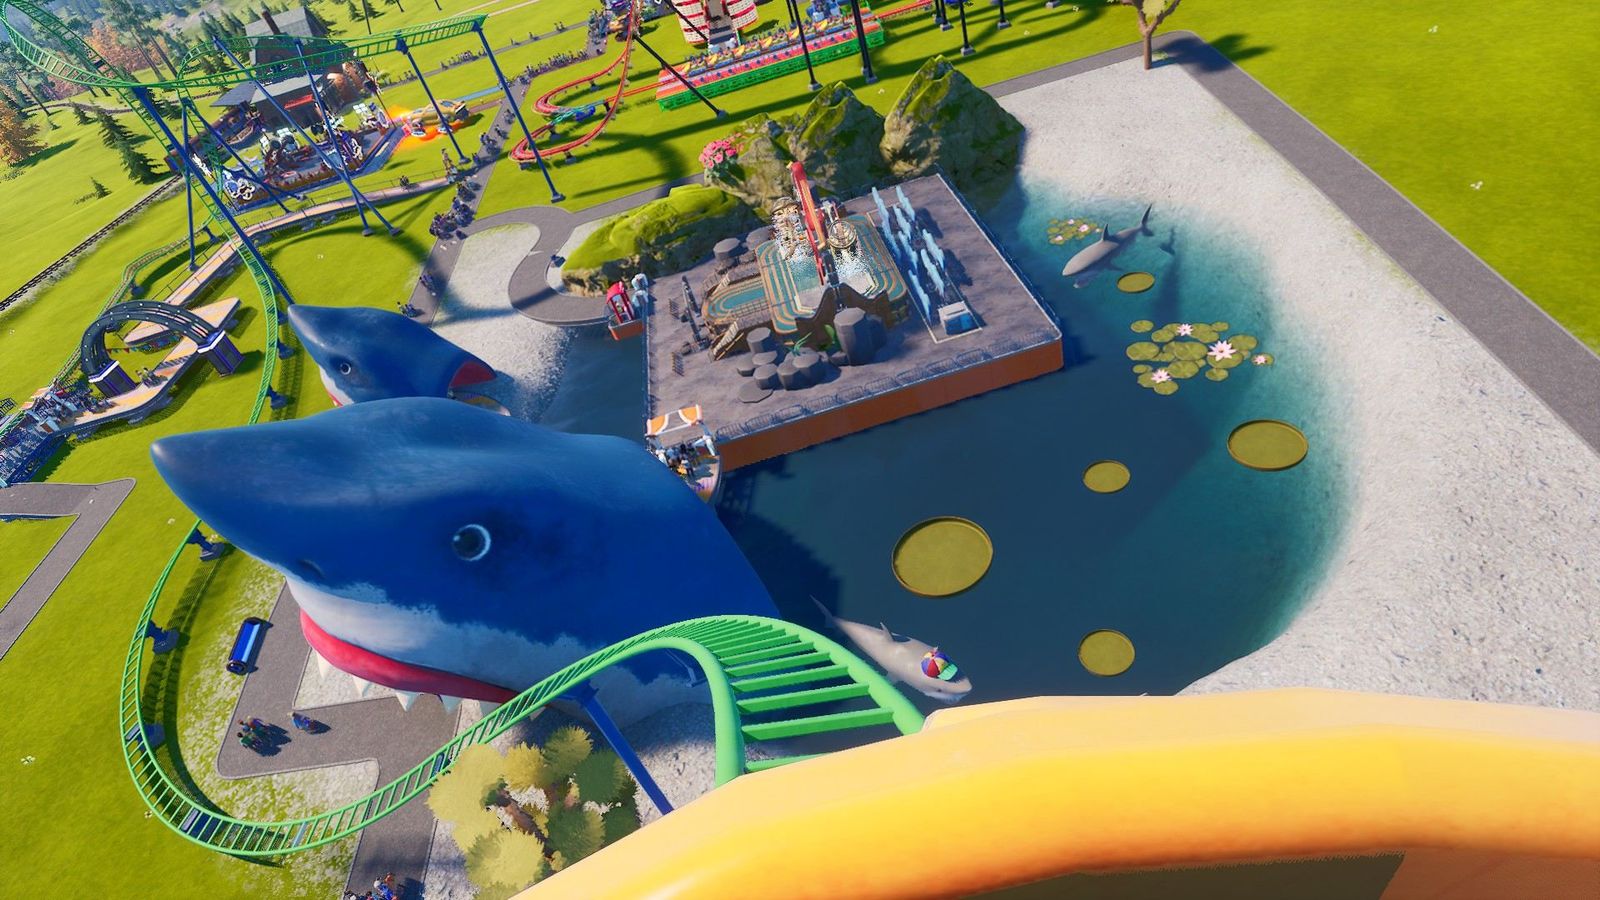 park beyond review - a first person rollercoaster ride through the mouth of a giant shark head